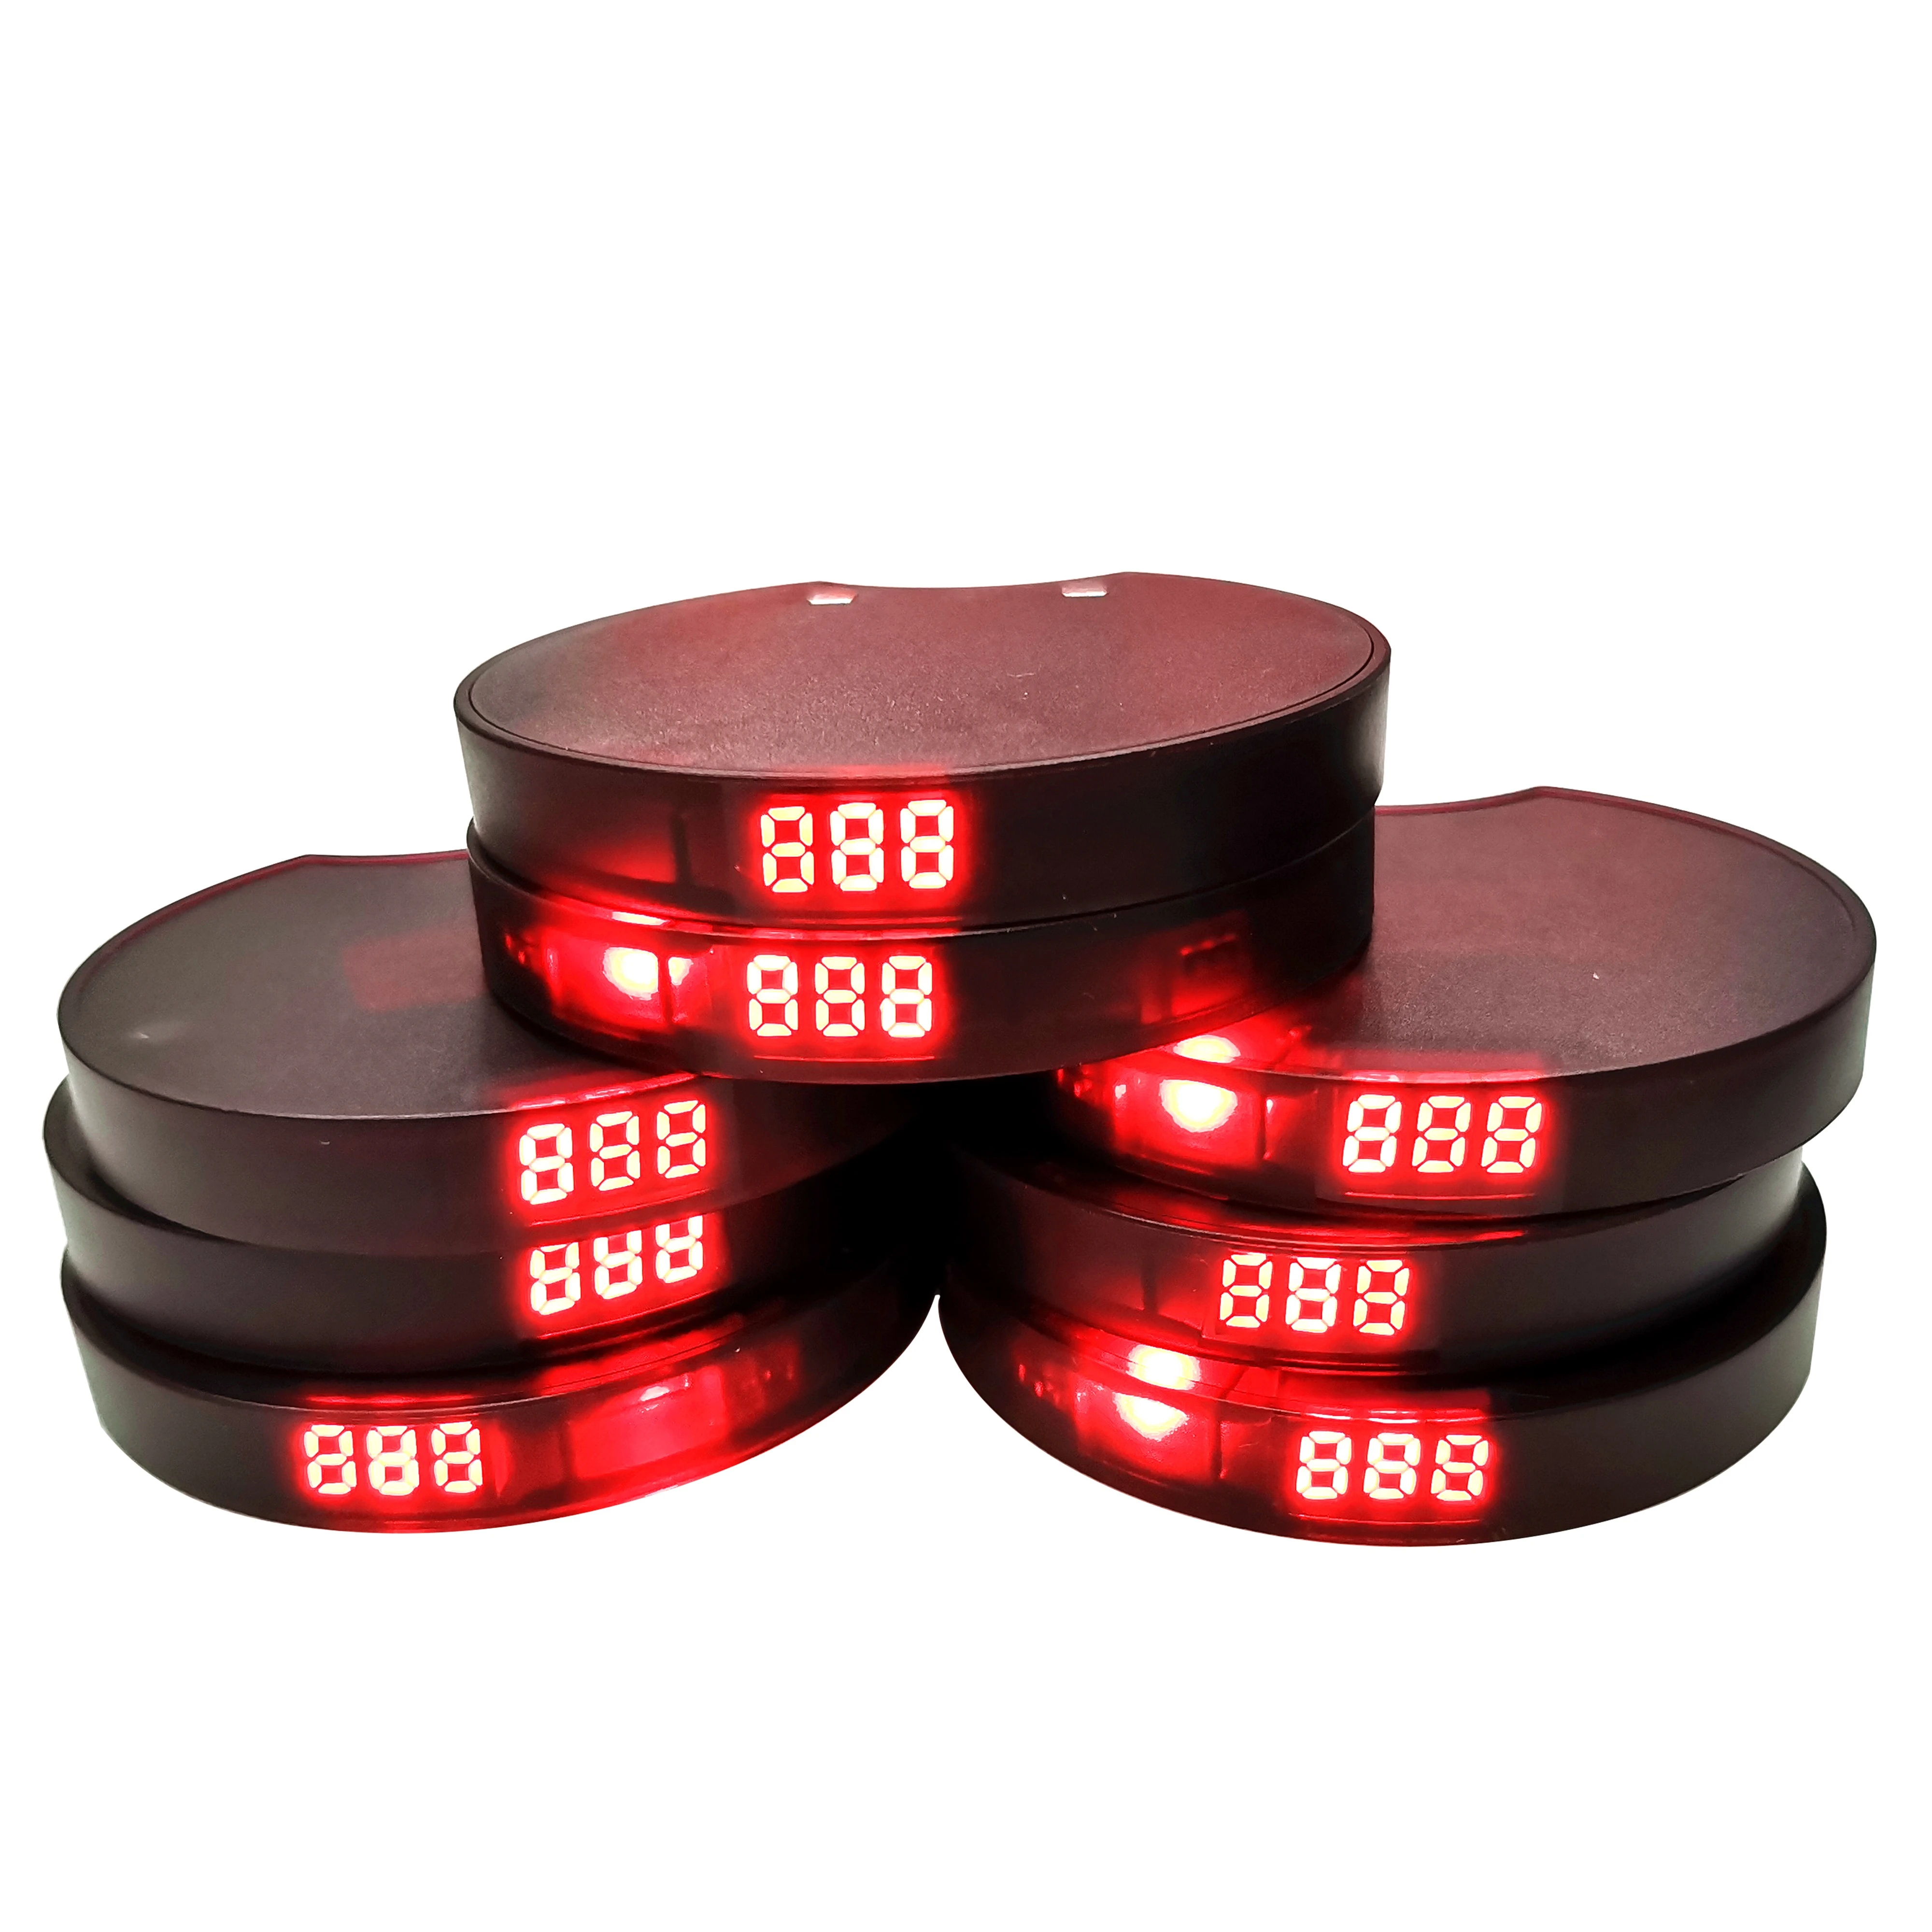 Wireless Restaurant Paging System Kitchen Waiter Buzzer Call Vibrating Pagers